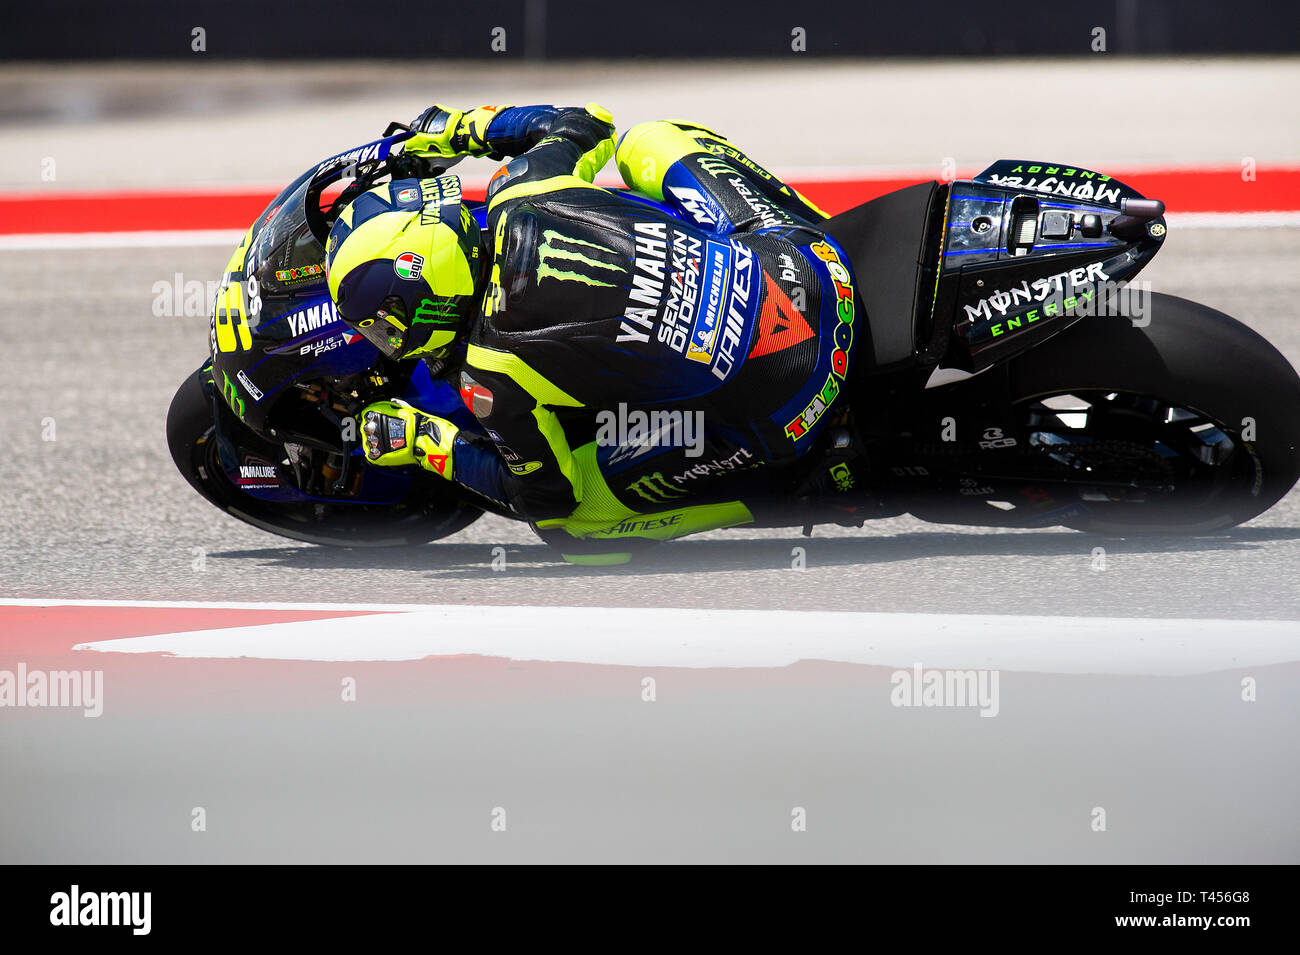 April 13, 2019: Valentino Rossi #46 with Monster Energy Yamaha MotoGP Team  - Yamaha YZR-M1 in